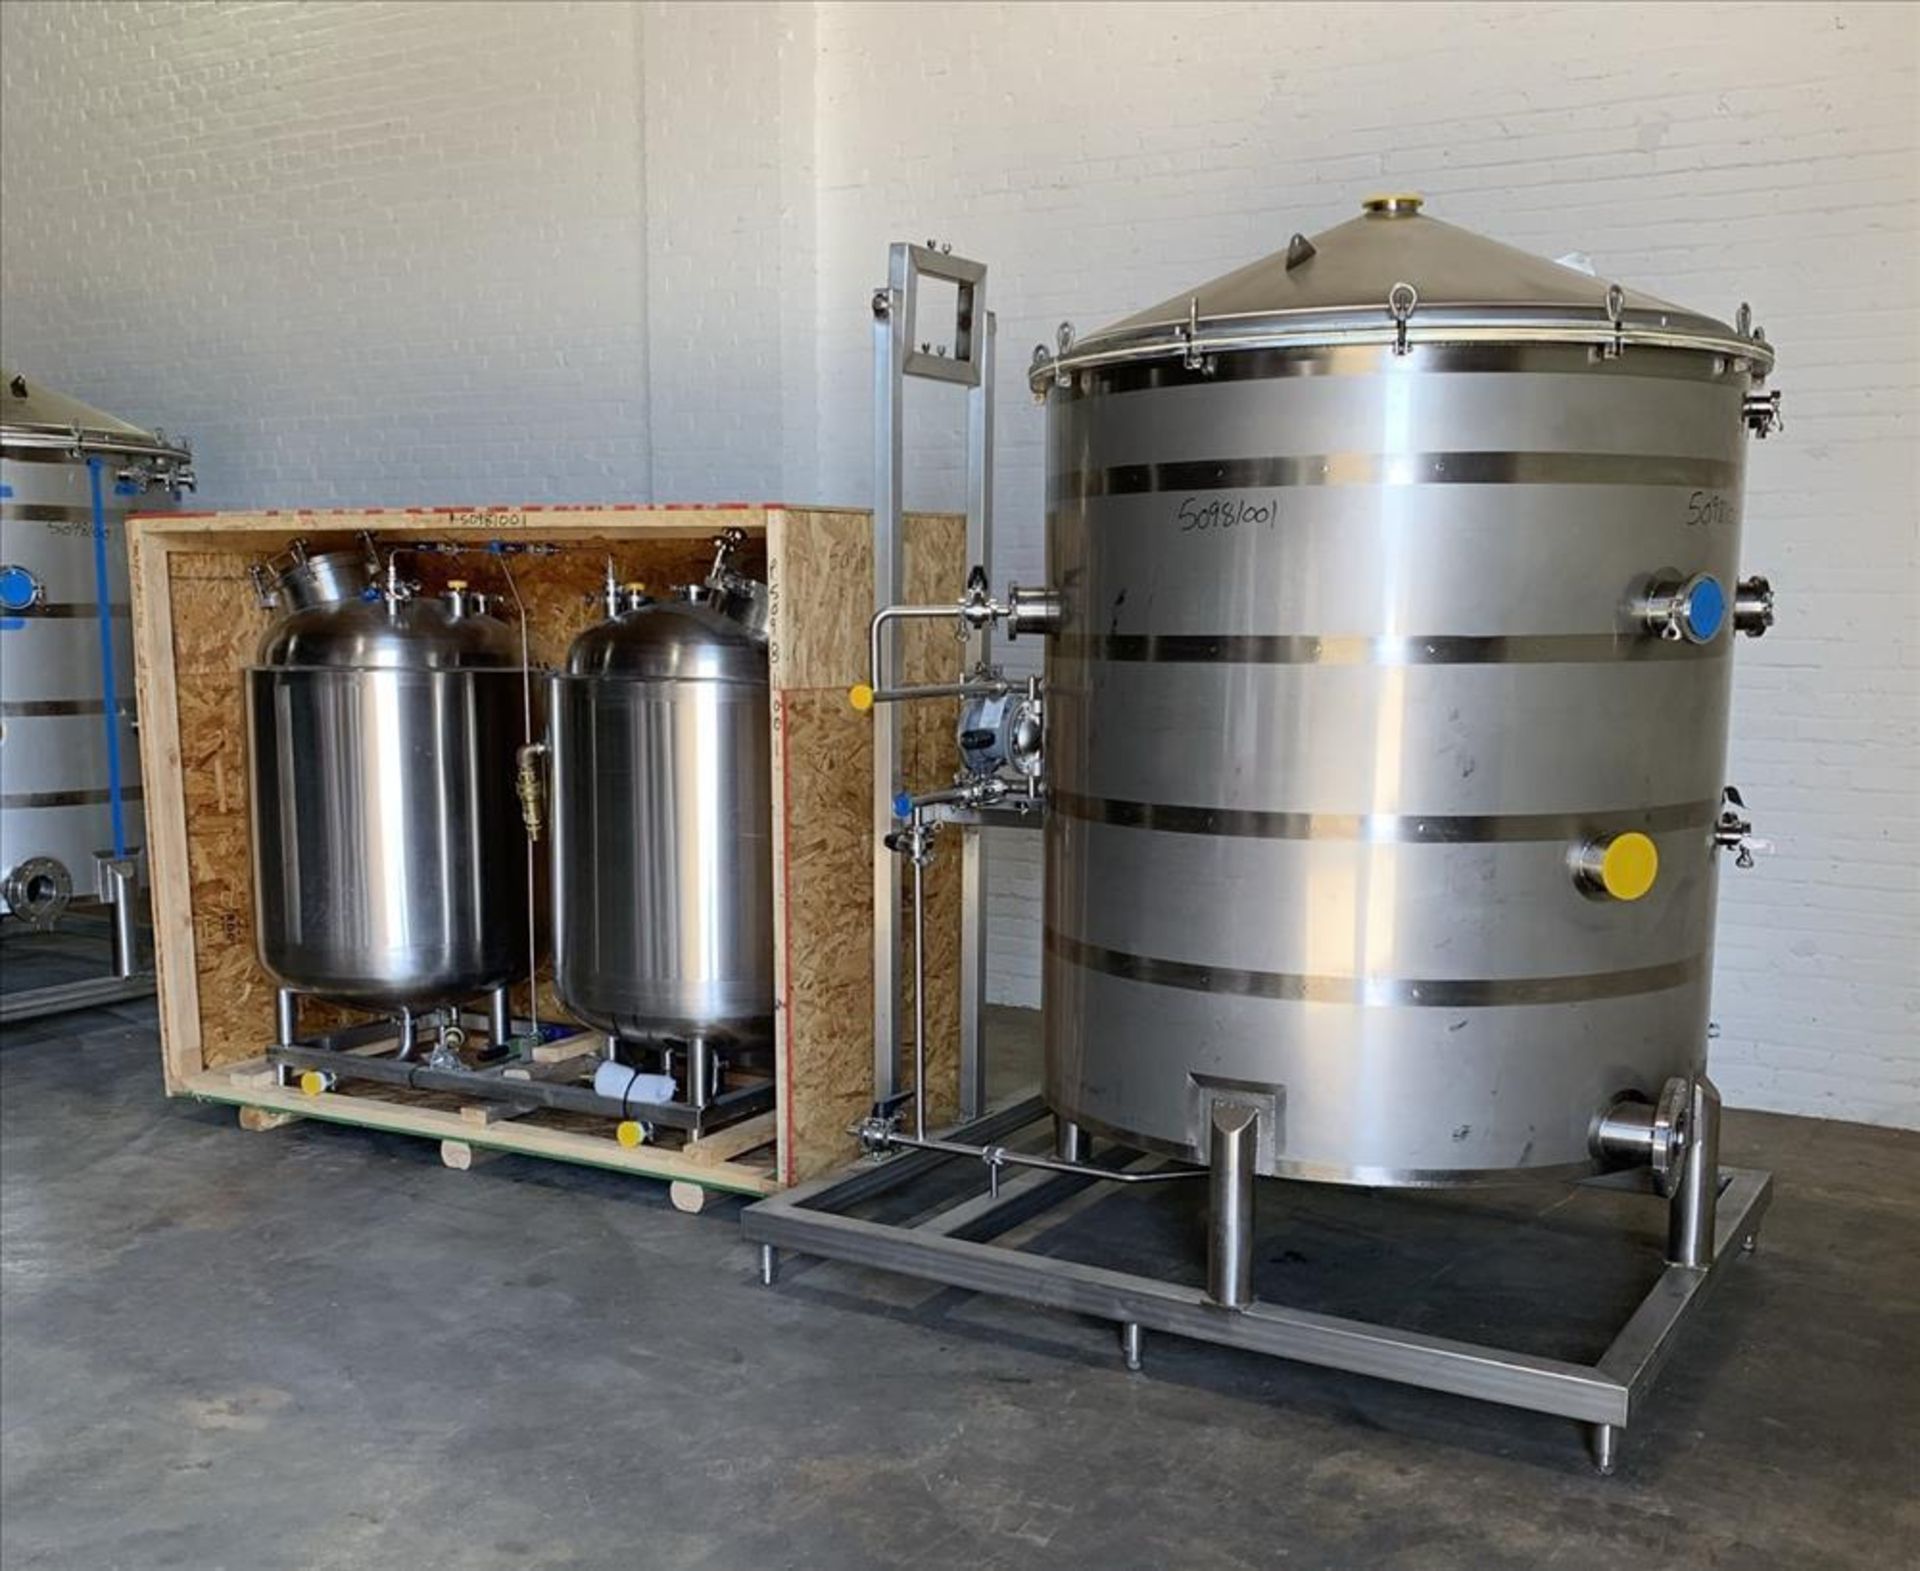 UNUSED - New In Crates - Eden Labs 3-Circuit Ethanol Platform Extraction & Solvent Recovery System - Image 34 of 152